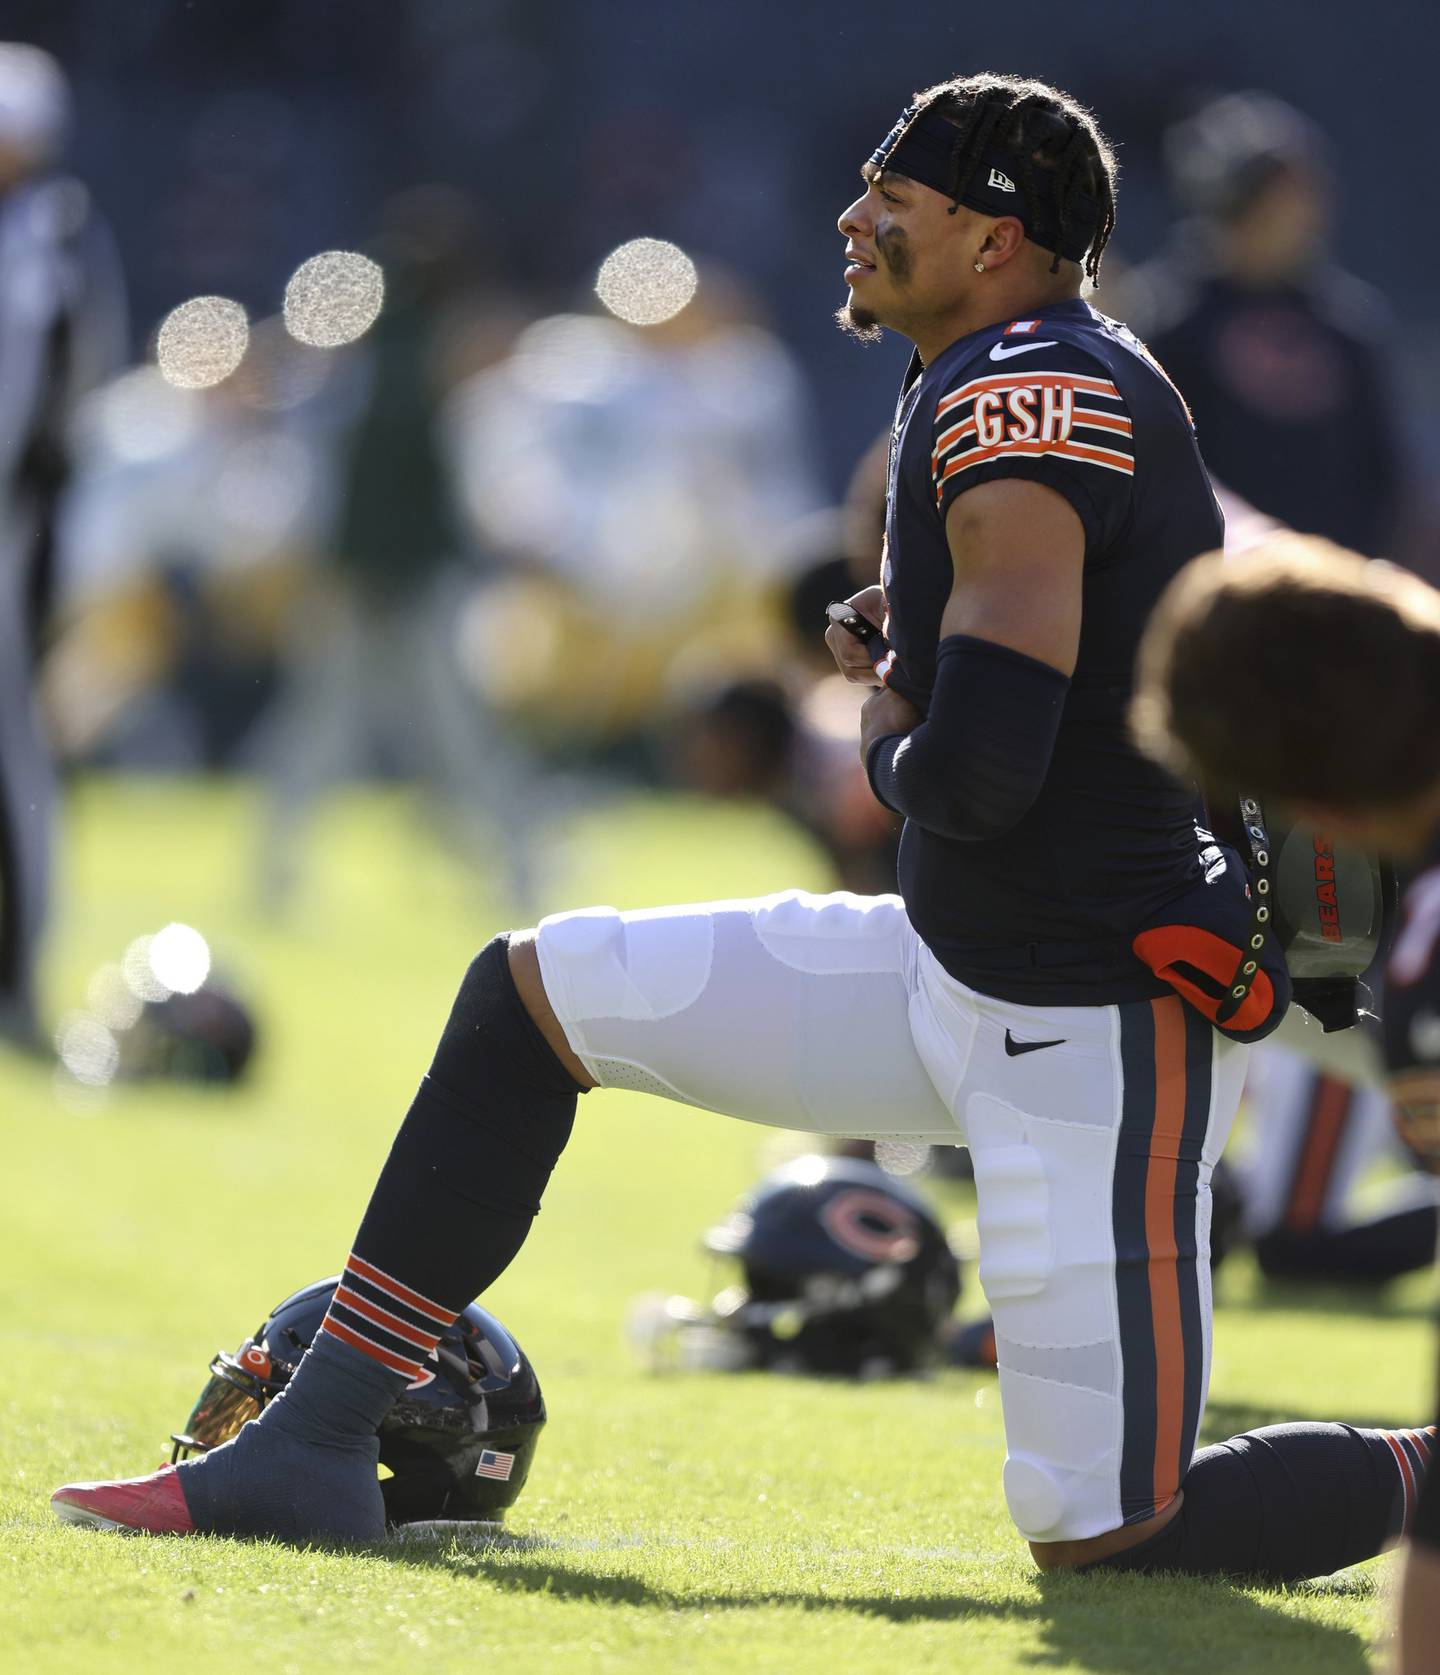 Bears quarterback Justin Fields stretches before a game against the Packers at Soldier Field on Dec. 4, 2022.